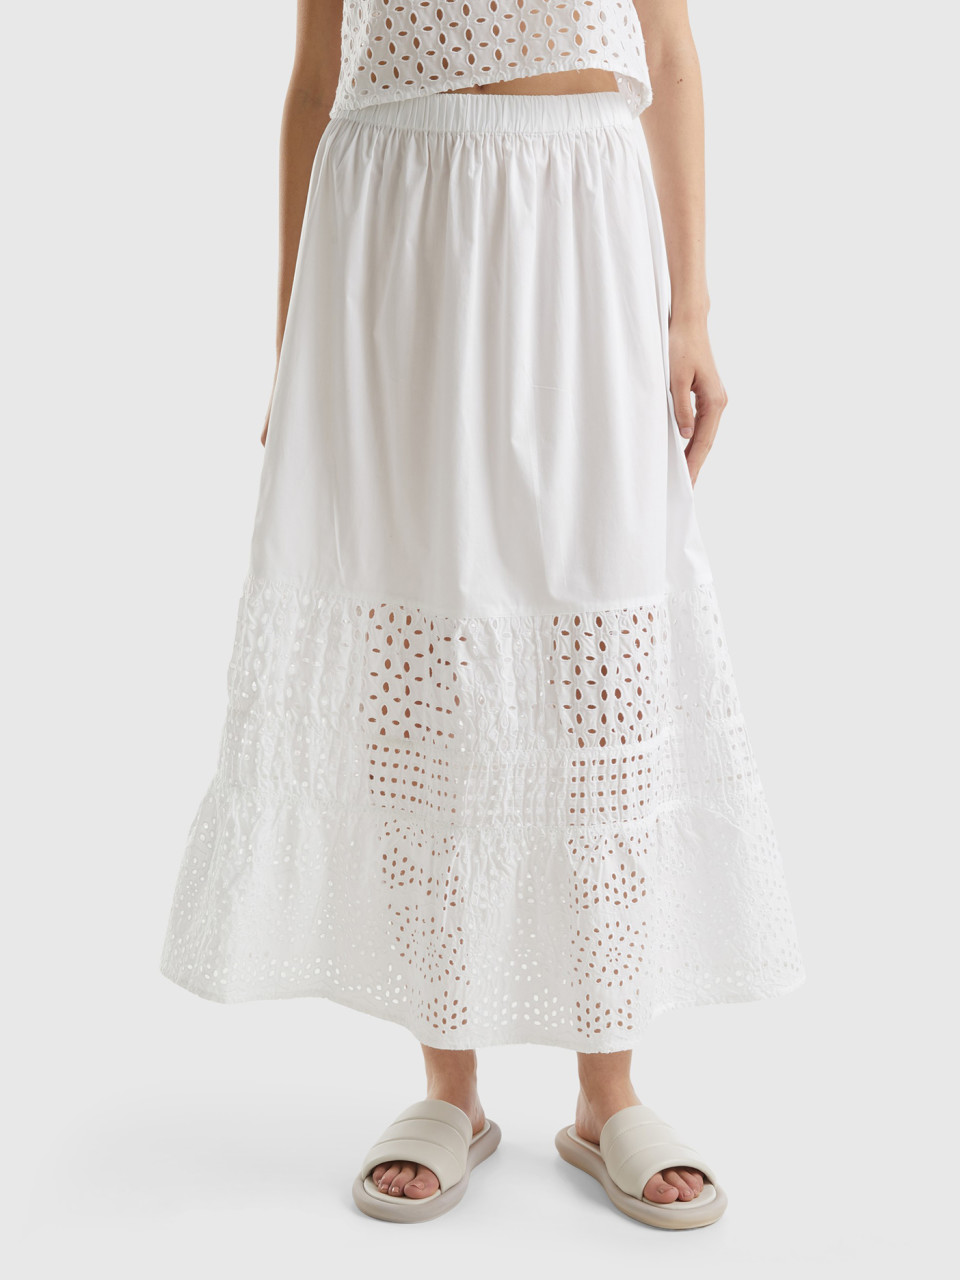 Benetton, Skirt With Broderie Anglaise, White, Women